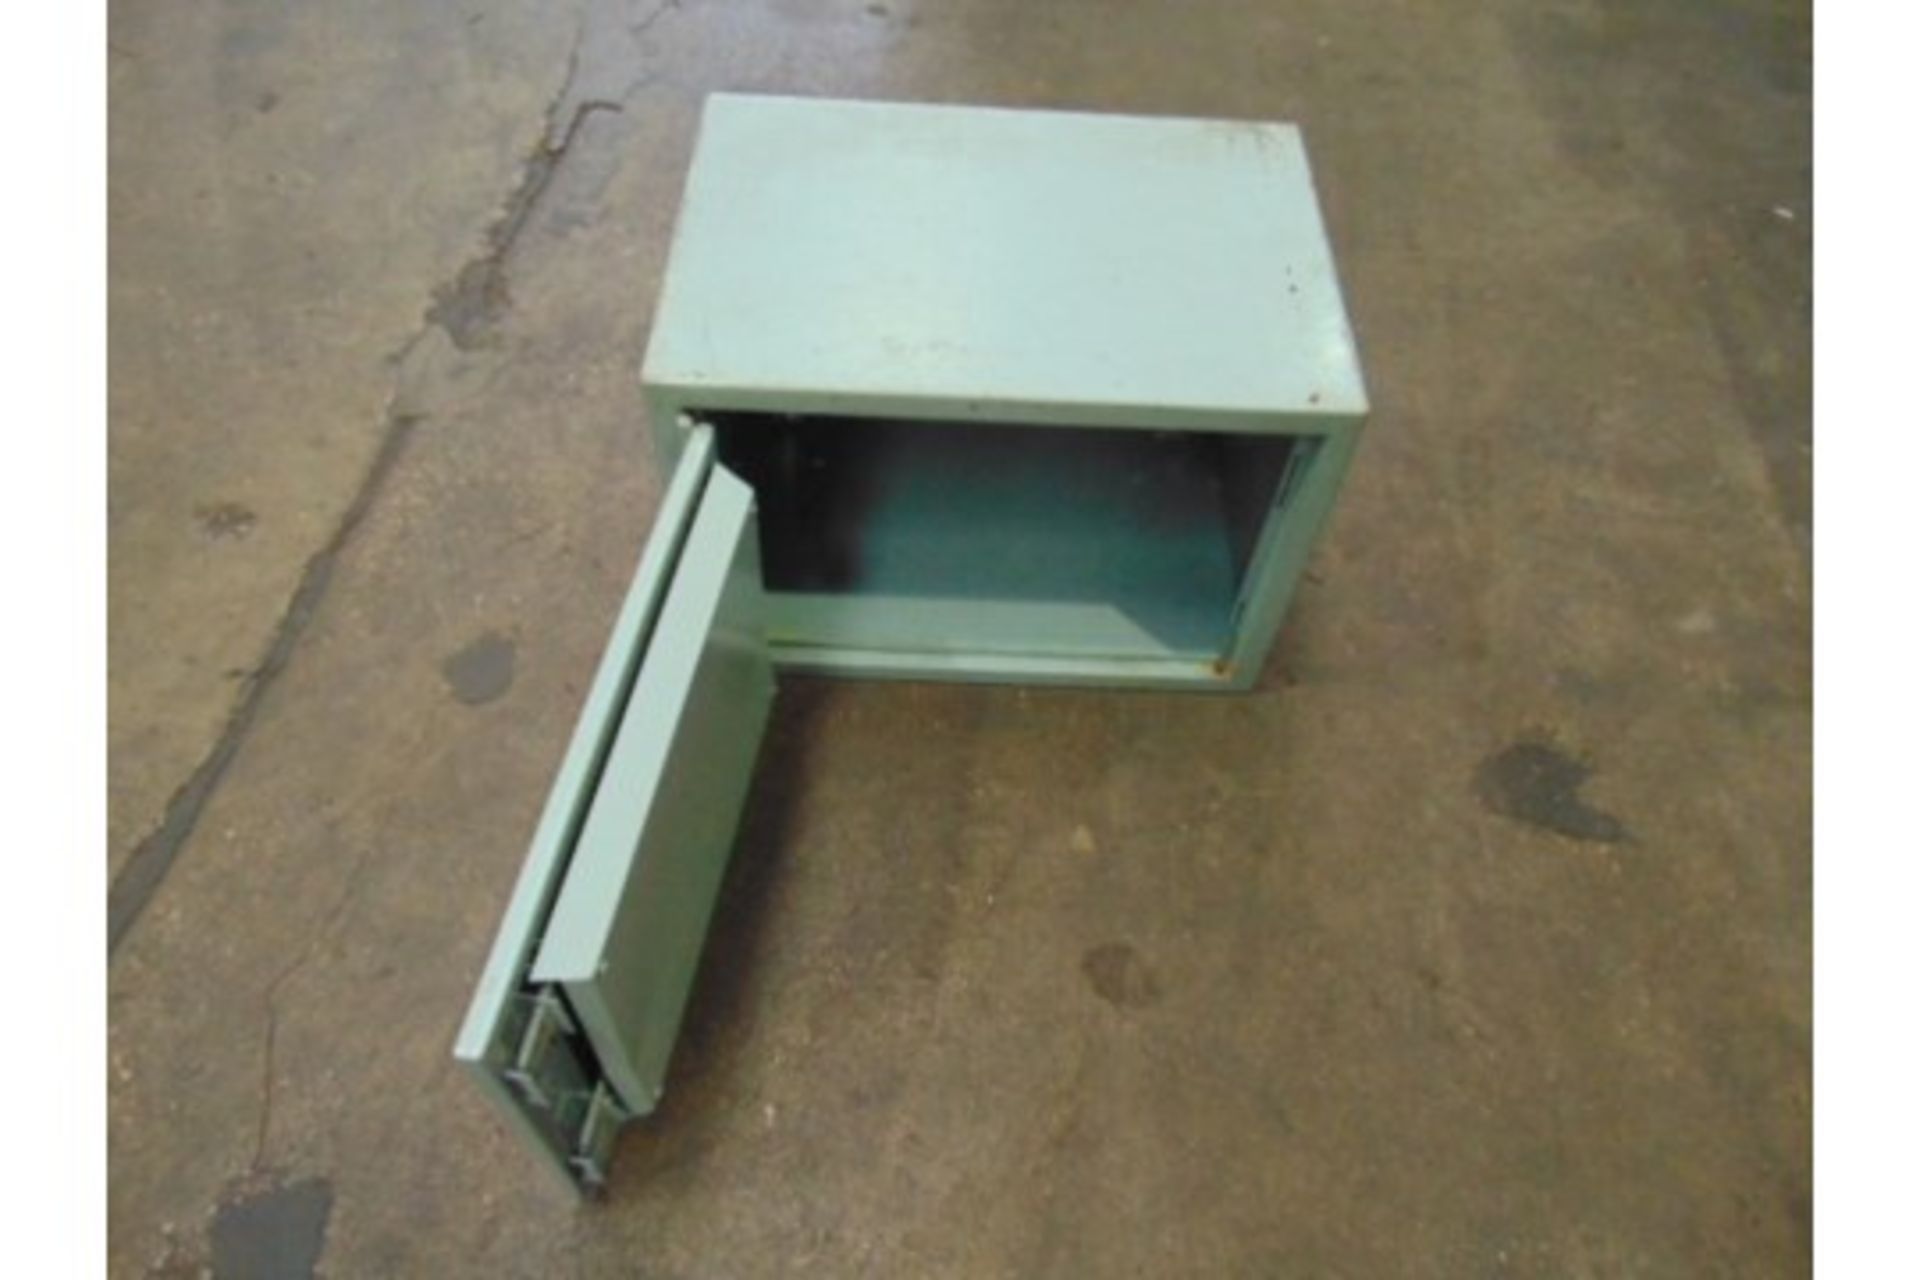 You are bidding on a Lockable Safe Box. It is sold as seen without warranty and has not been tried